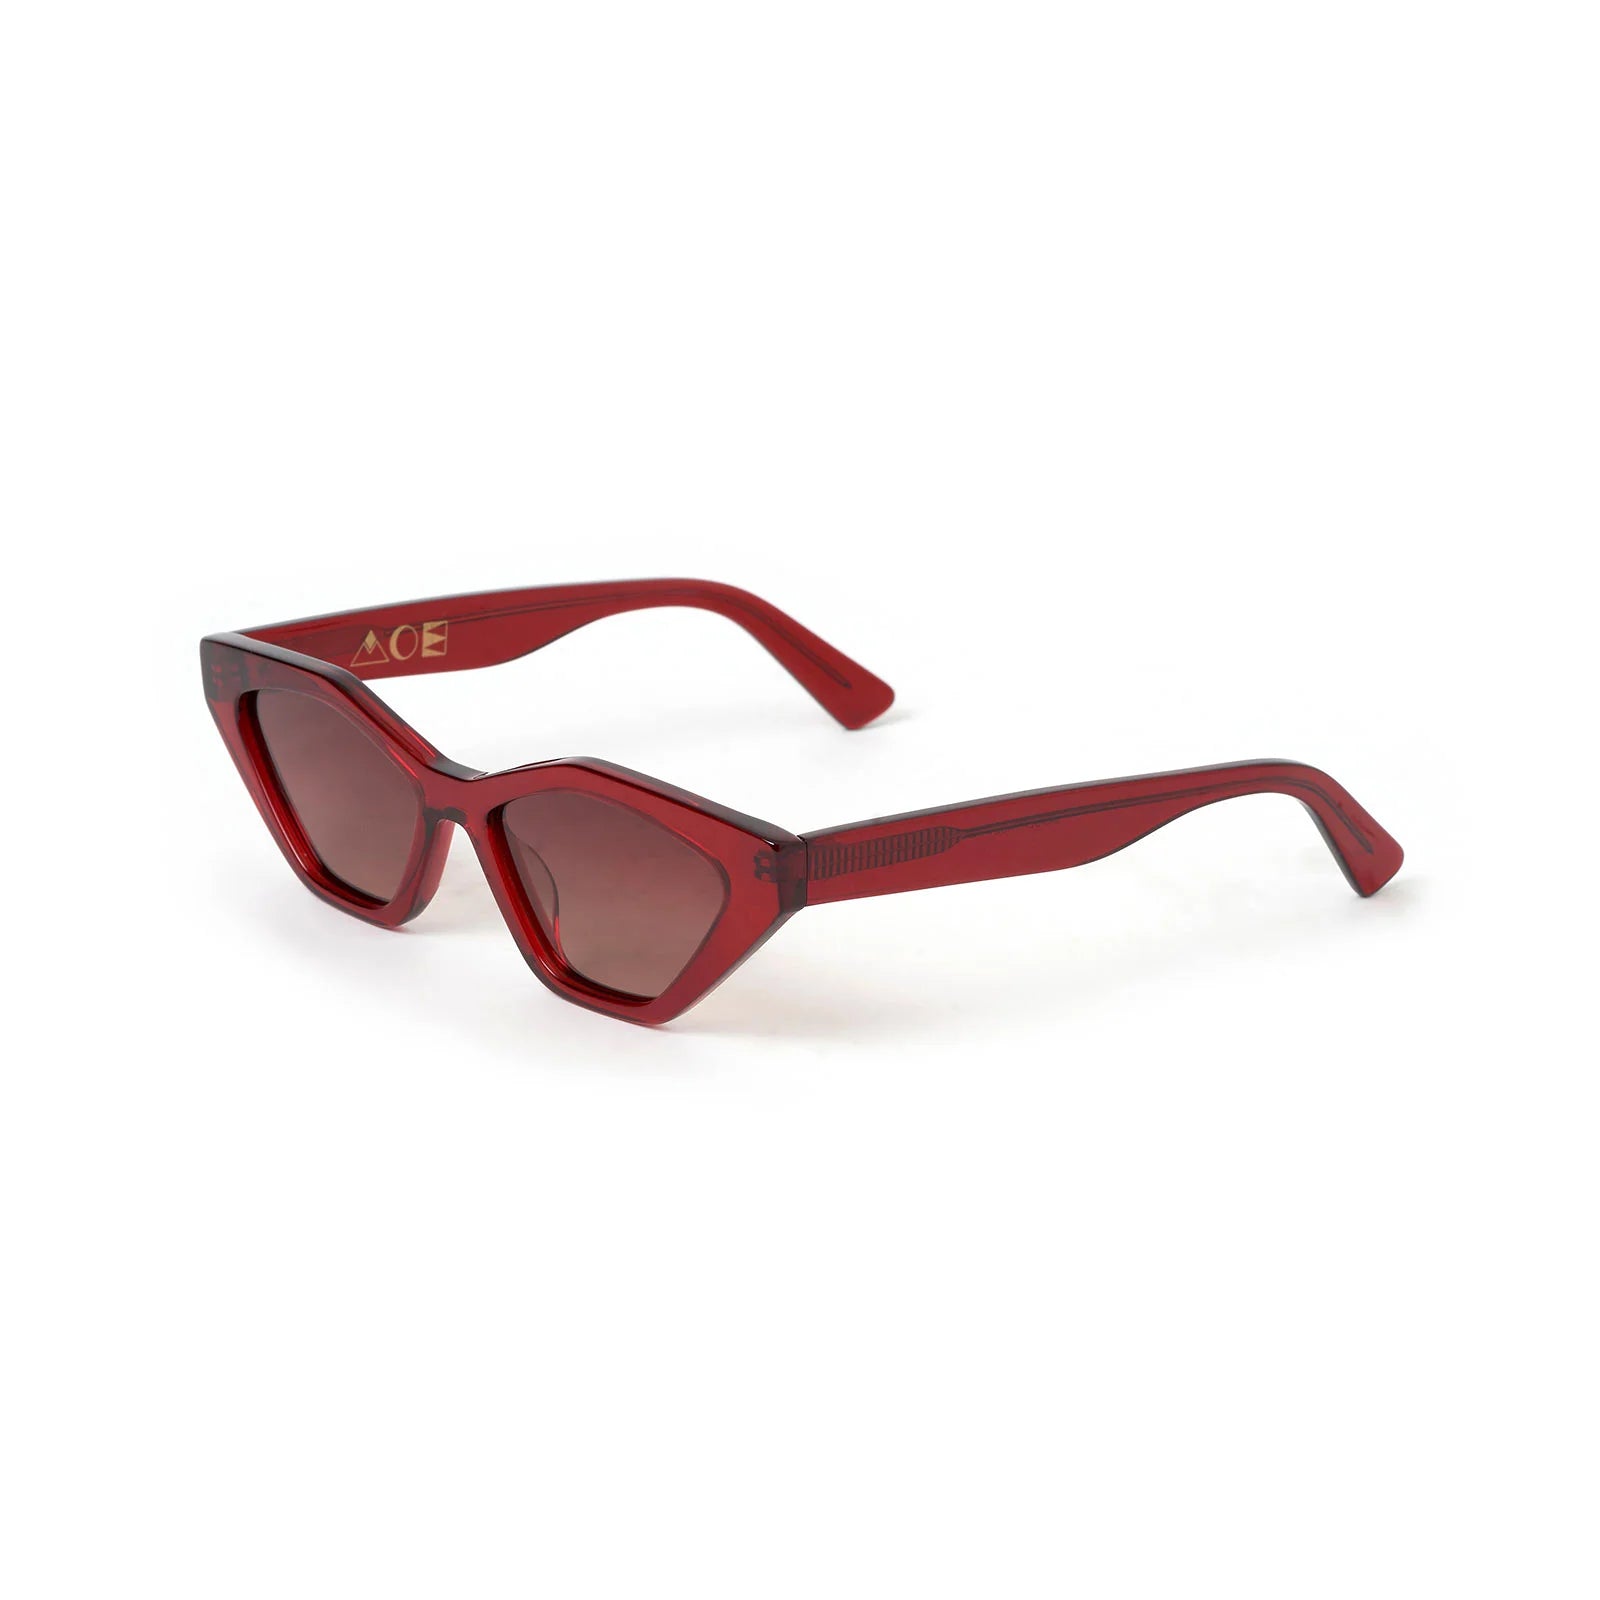 ARMS OF EVE JAGGER SUNGLASSES: CHERRY RED